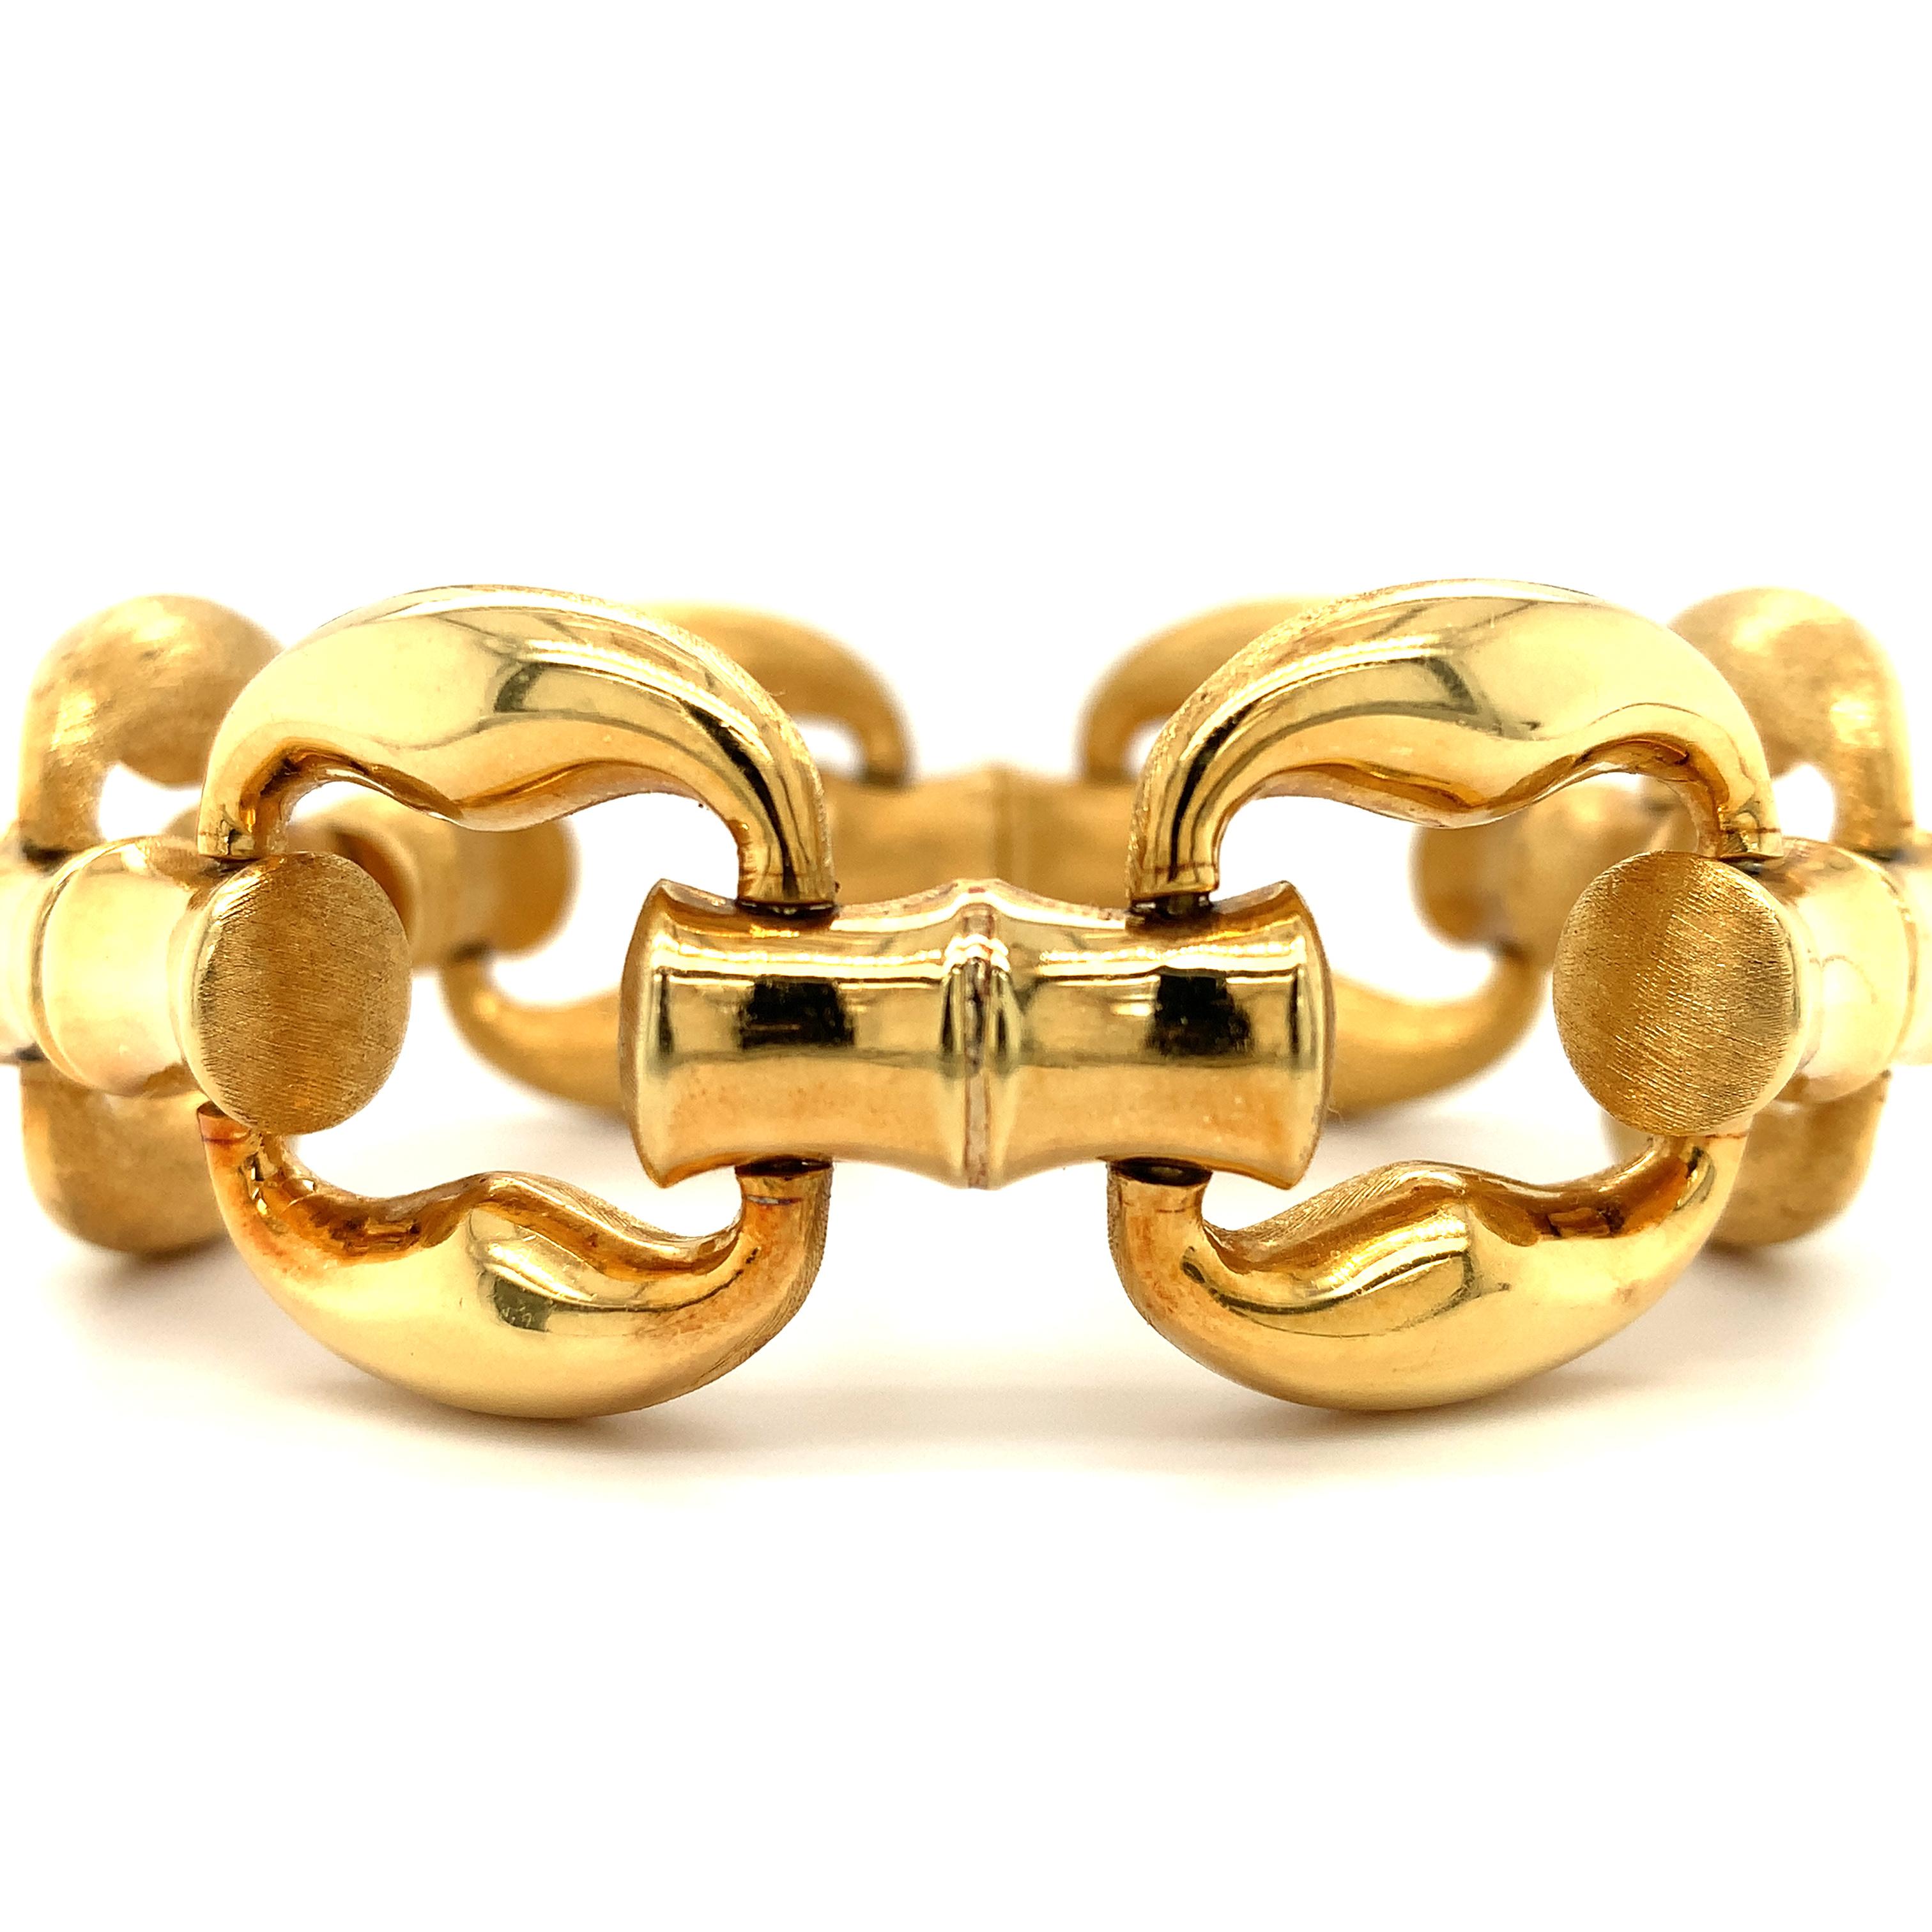 Gorgeous art deco style 18ct yellow gold reversible chunky large link bracelet.
Composed of chunky large bamboo elements and chain links bracelet hollow style bracelet.
Reversible design matte finish on one side and high polish on another side of